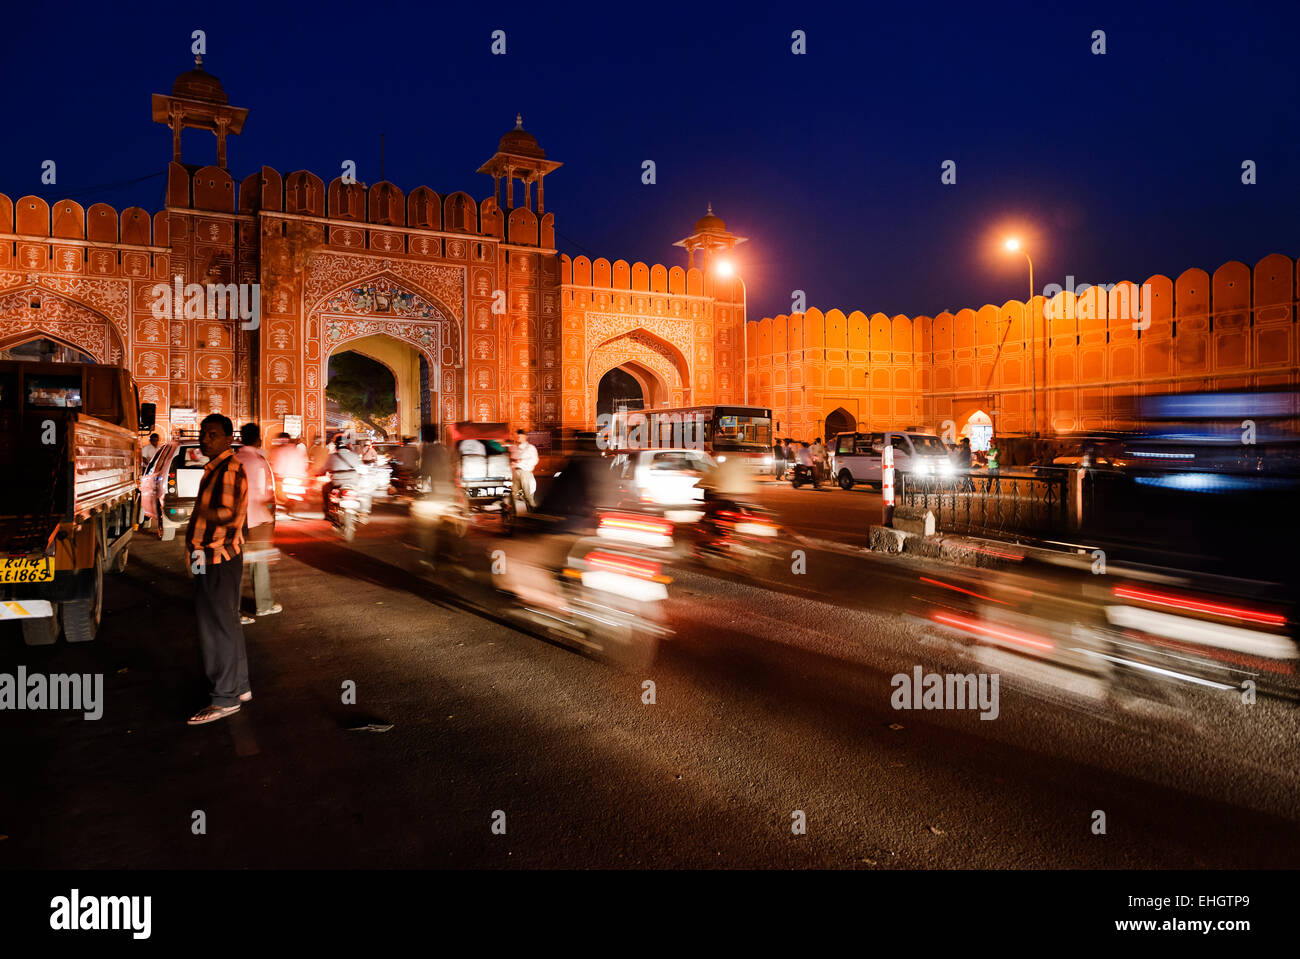 New Gate entrance to The Pink City in Jaipur. Stock Photo